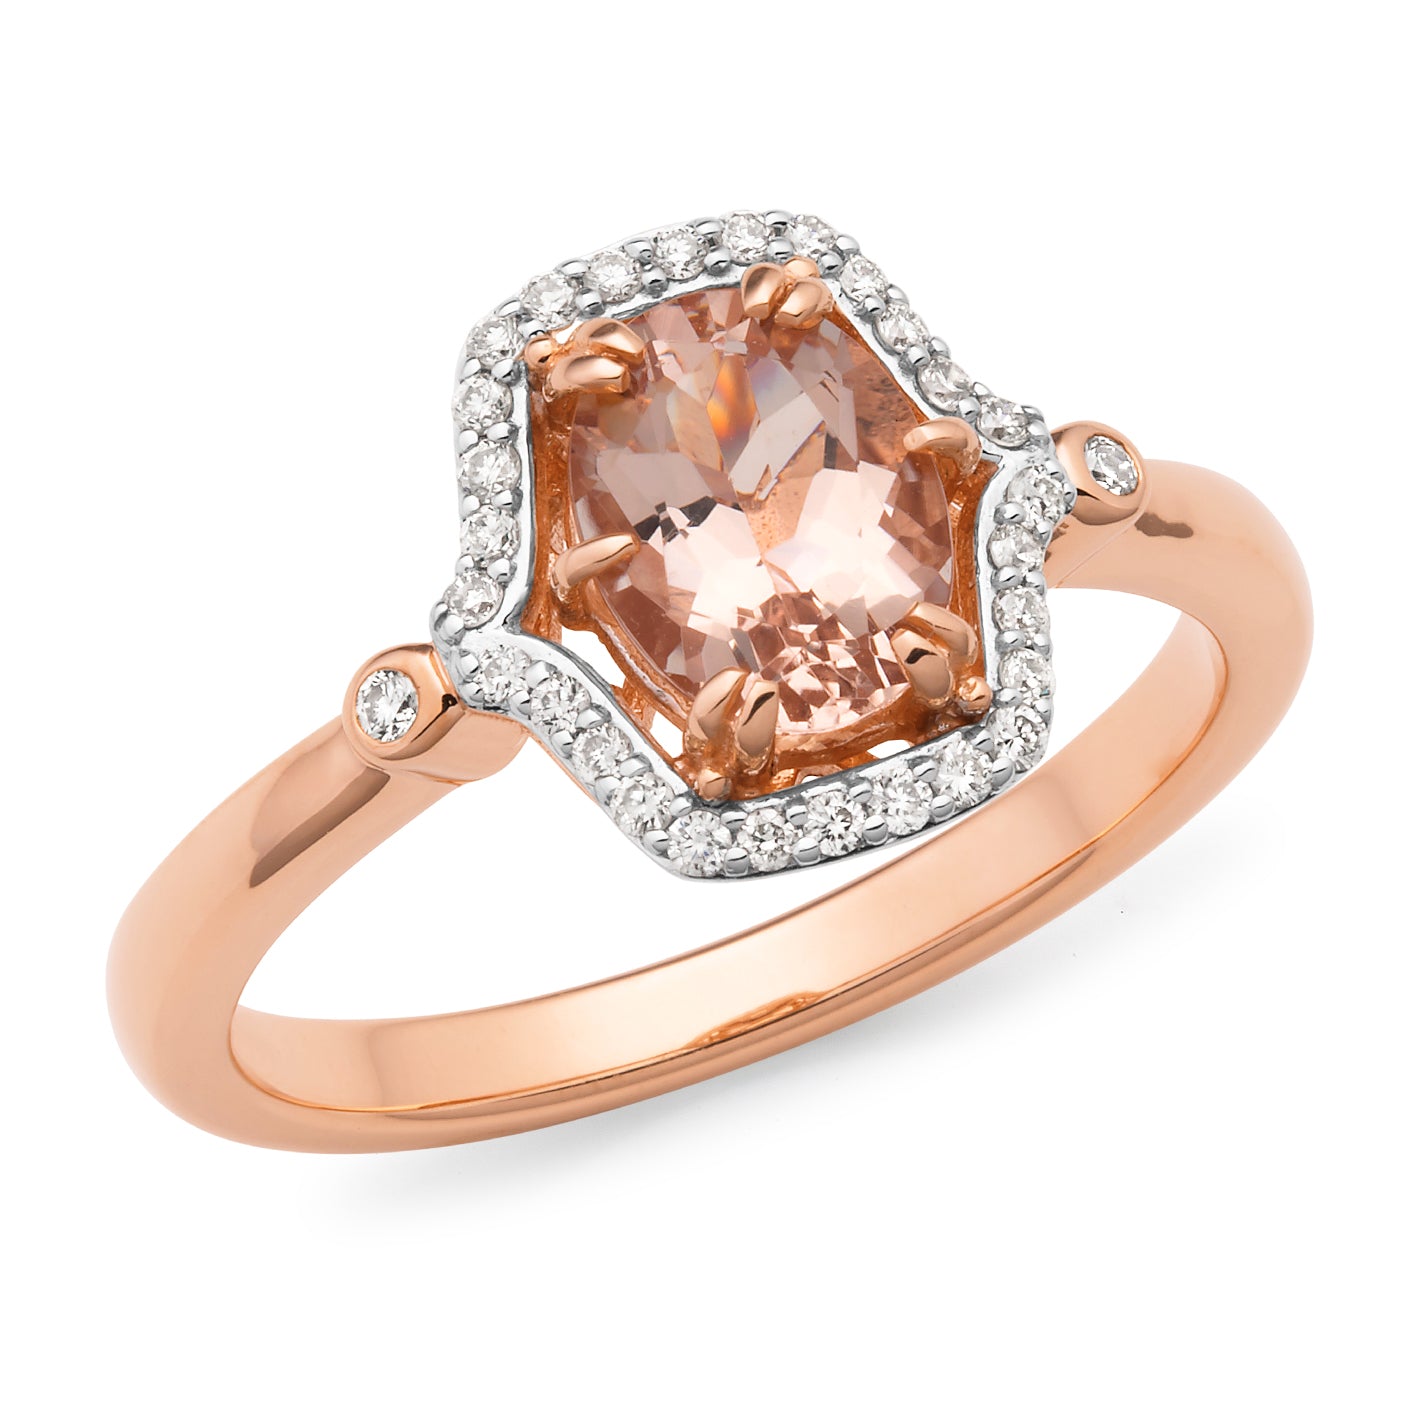 Winsome' Morganite & Diamond Ring in 9ct Rose Gold